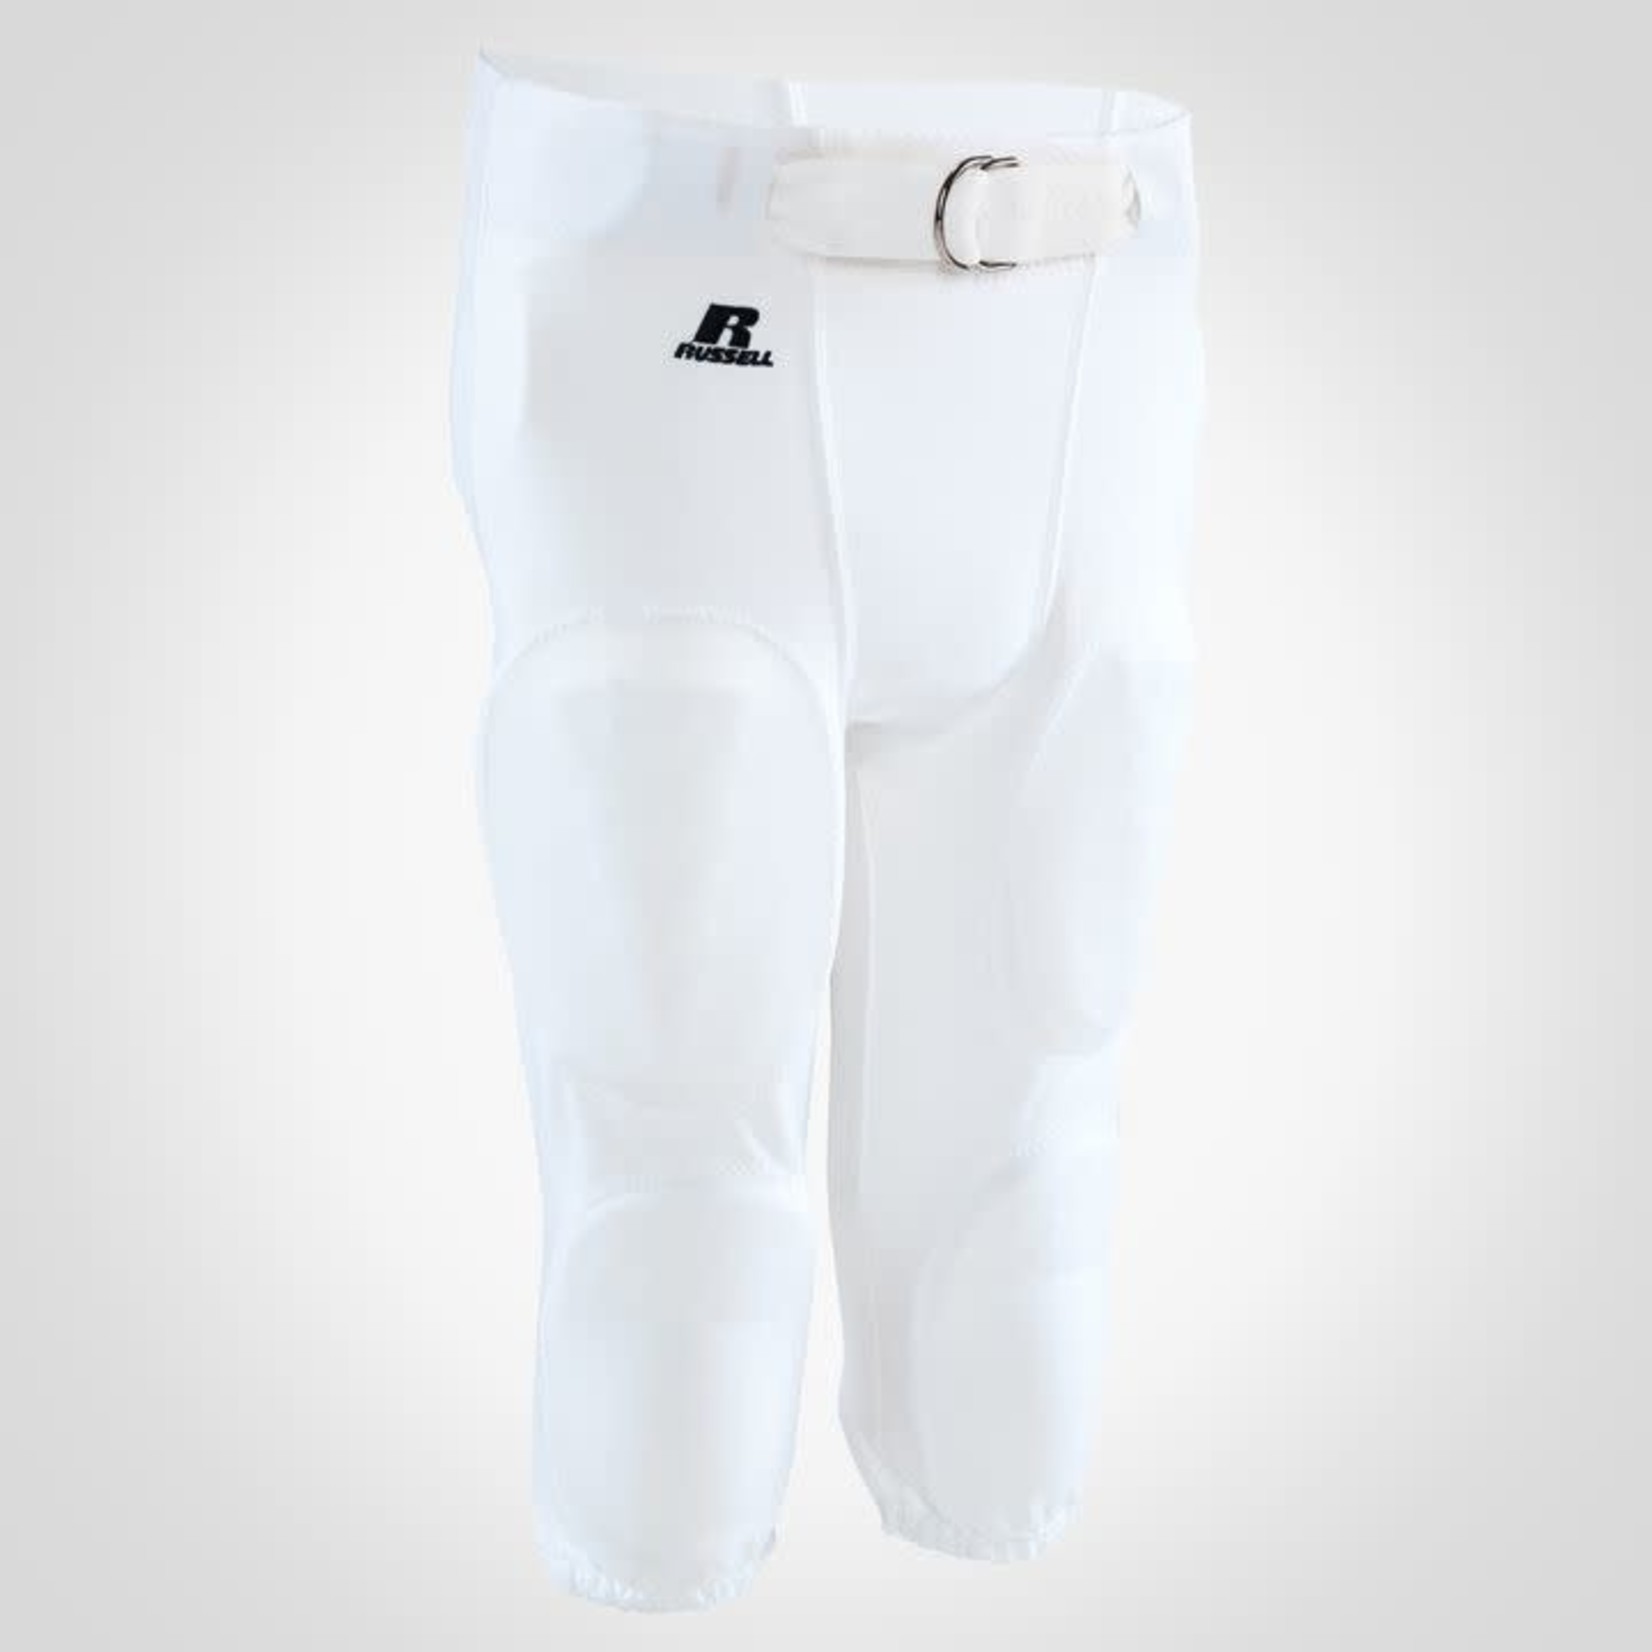 Russell Russell Adult Football Pants w/ Slots